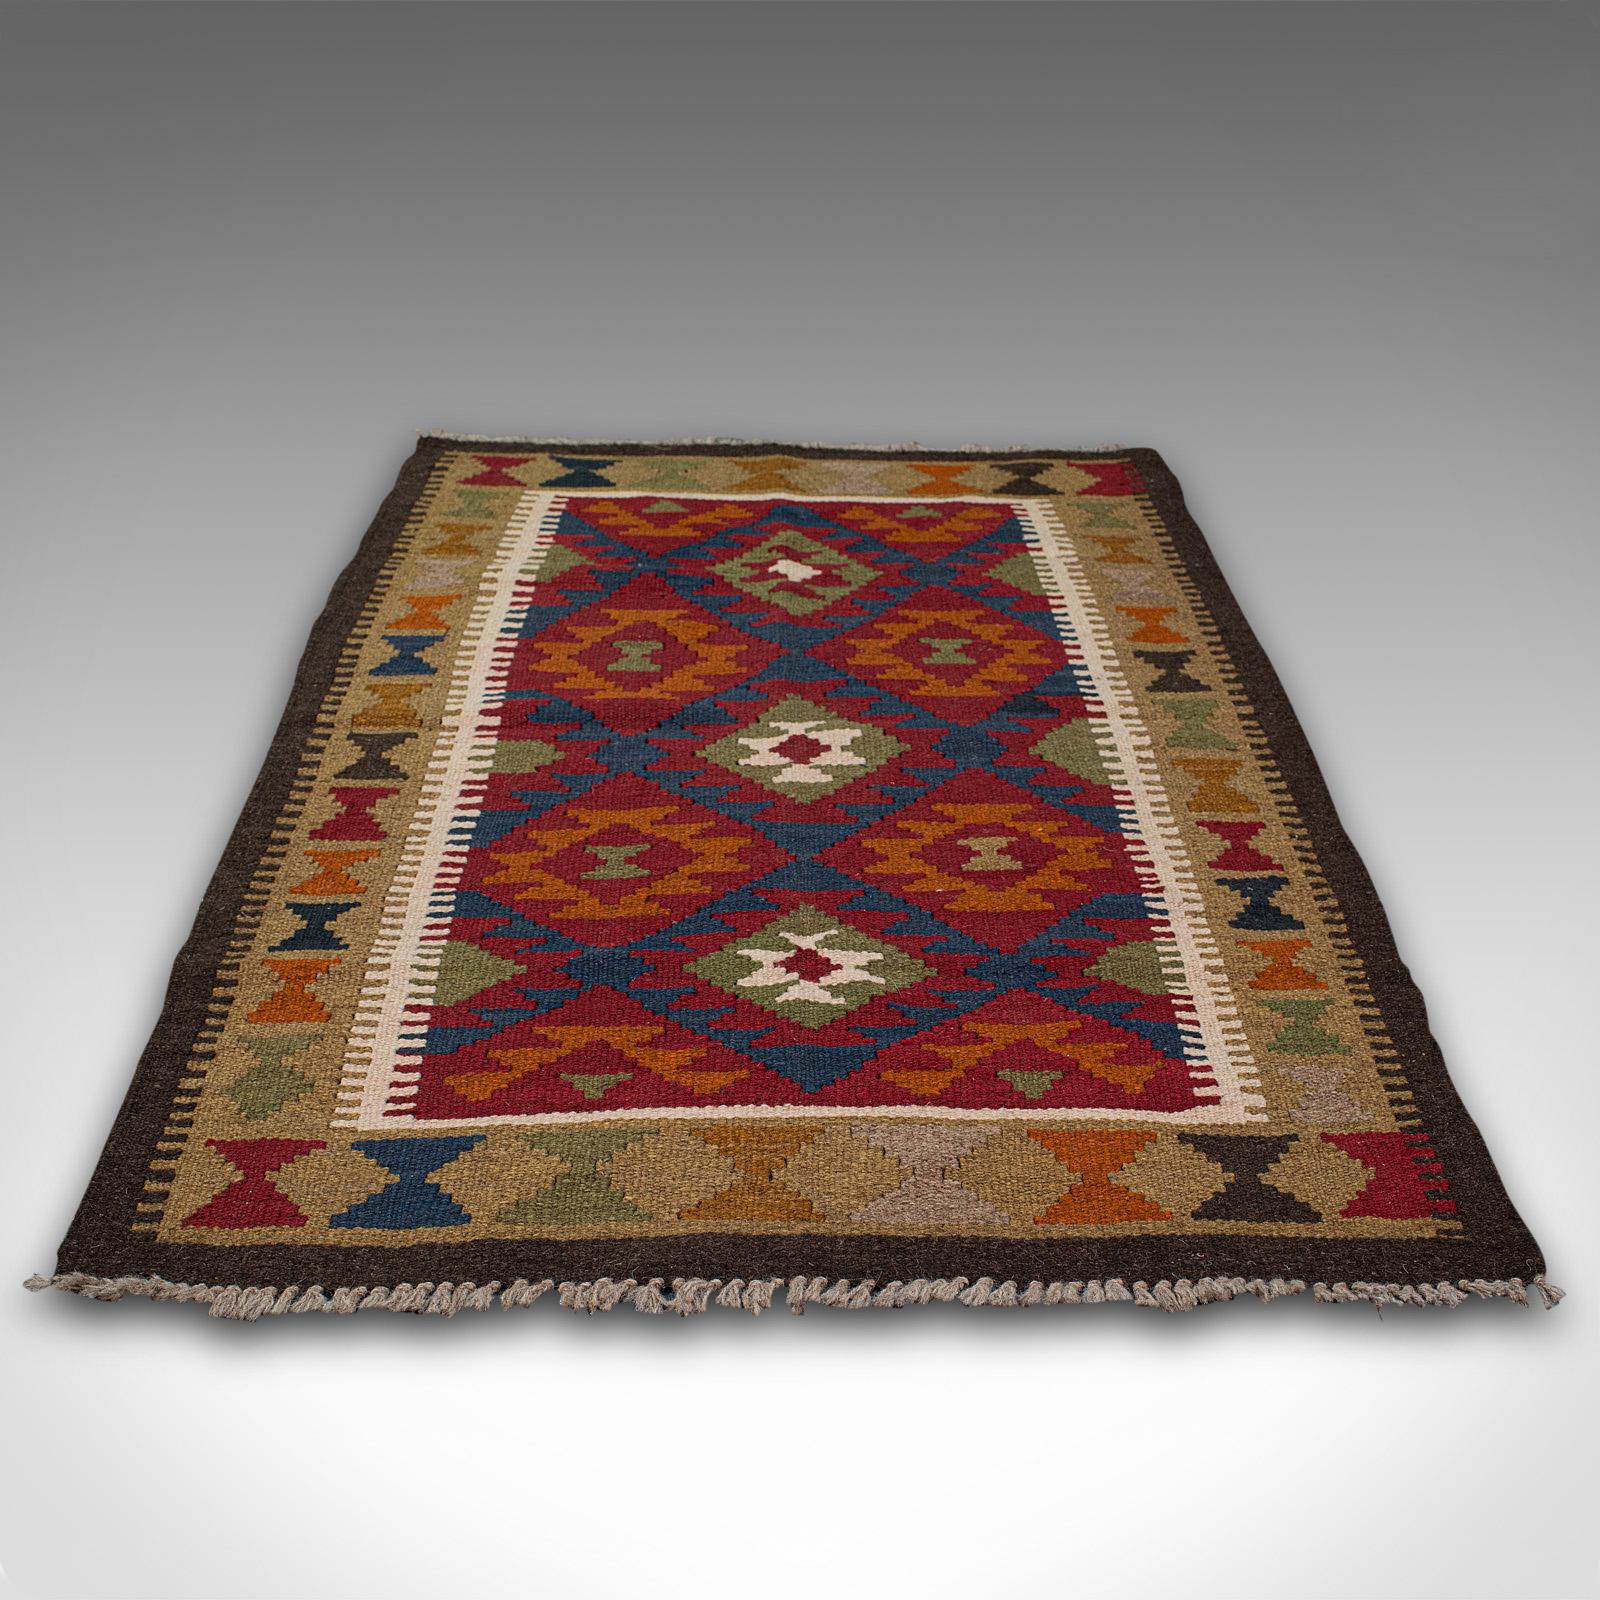 This is a small vintage Maimana Kilim carpet. A Middle Eastern, woven prayer mat or rug, dating to the late 20th century, circa 1970.

Of useful prayer mat or entrance size at 87.5cm x 140cm (34.5